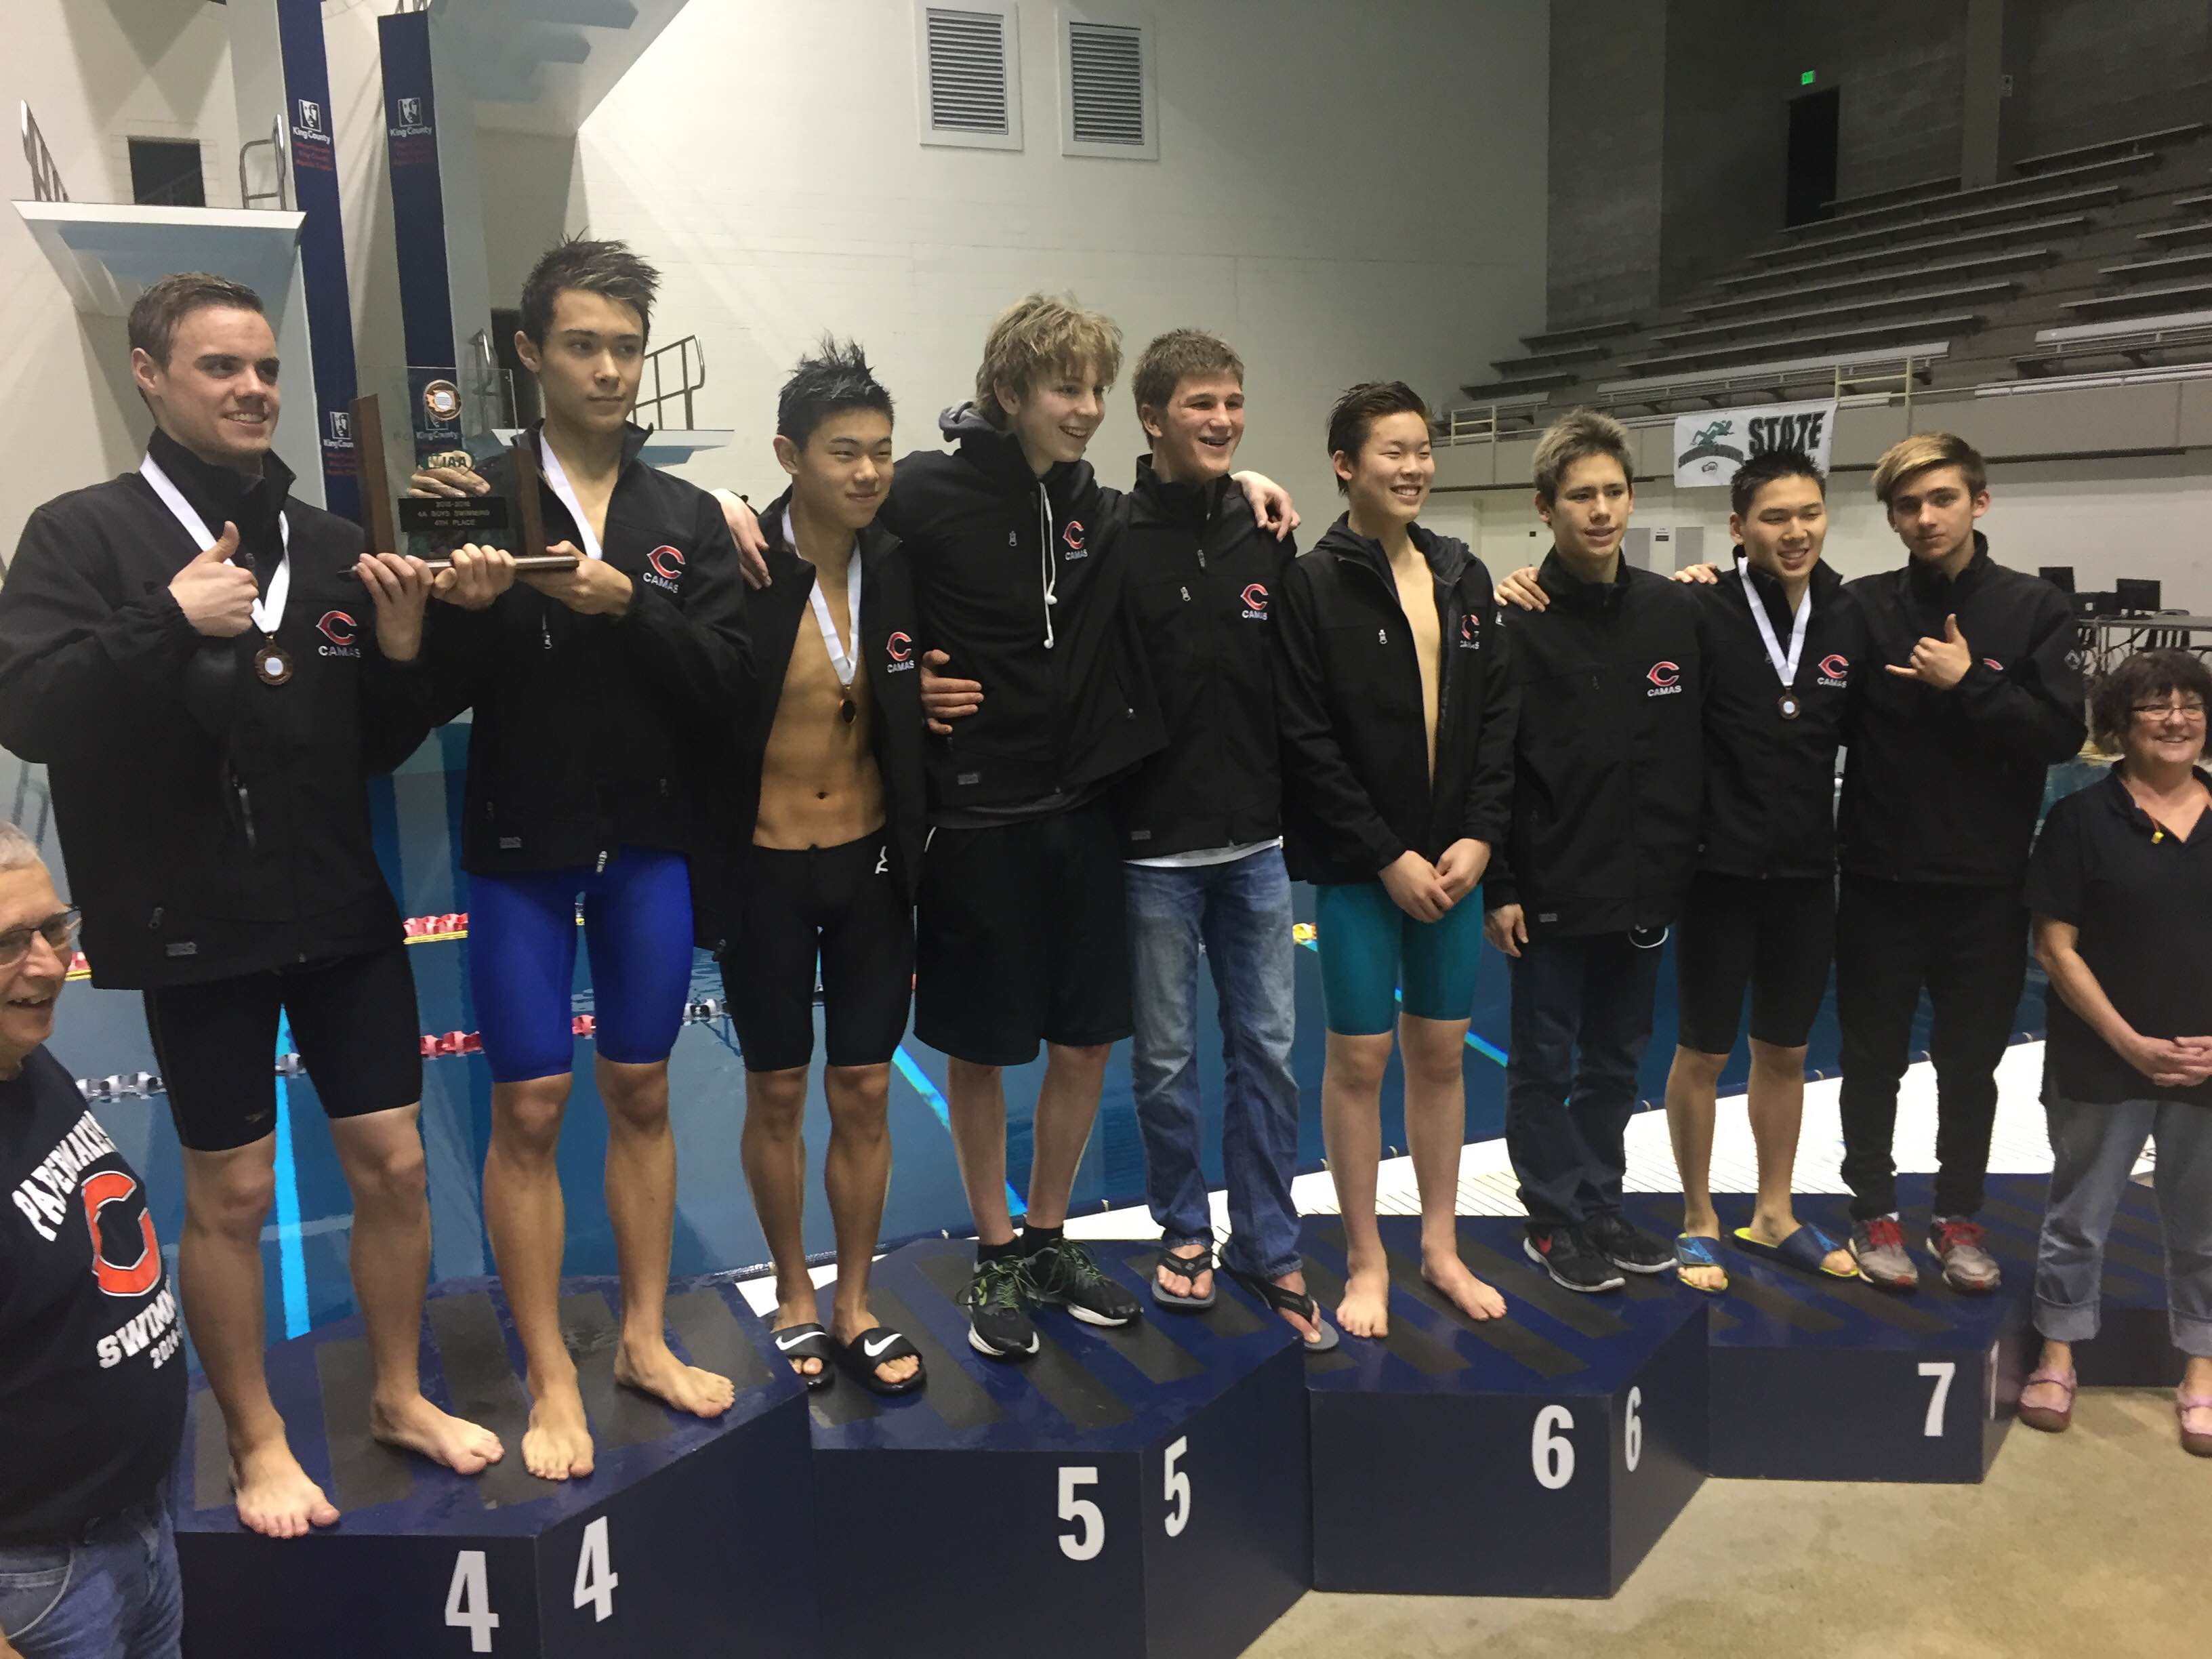 Members of the Camas swim team on the podium after receiving their fourth-place team medals at the 4A state meet at Federal Way on Saturday, Feb. 20, 2016.